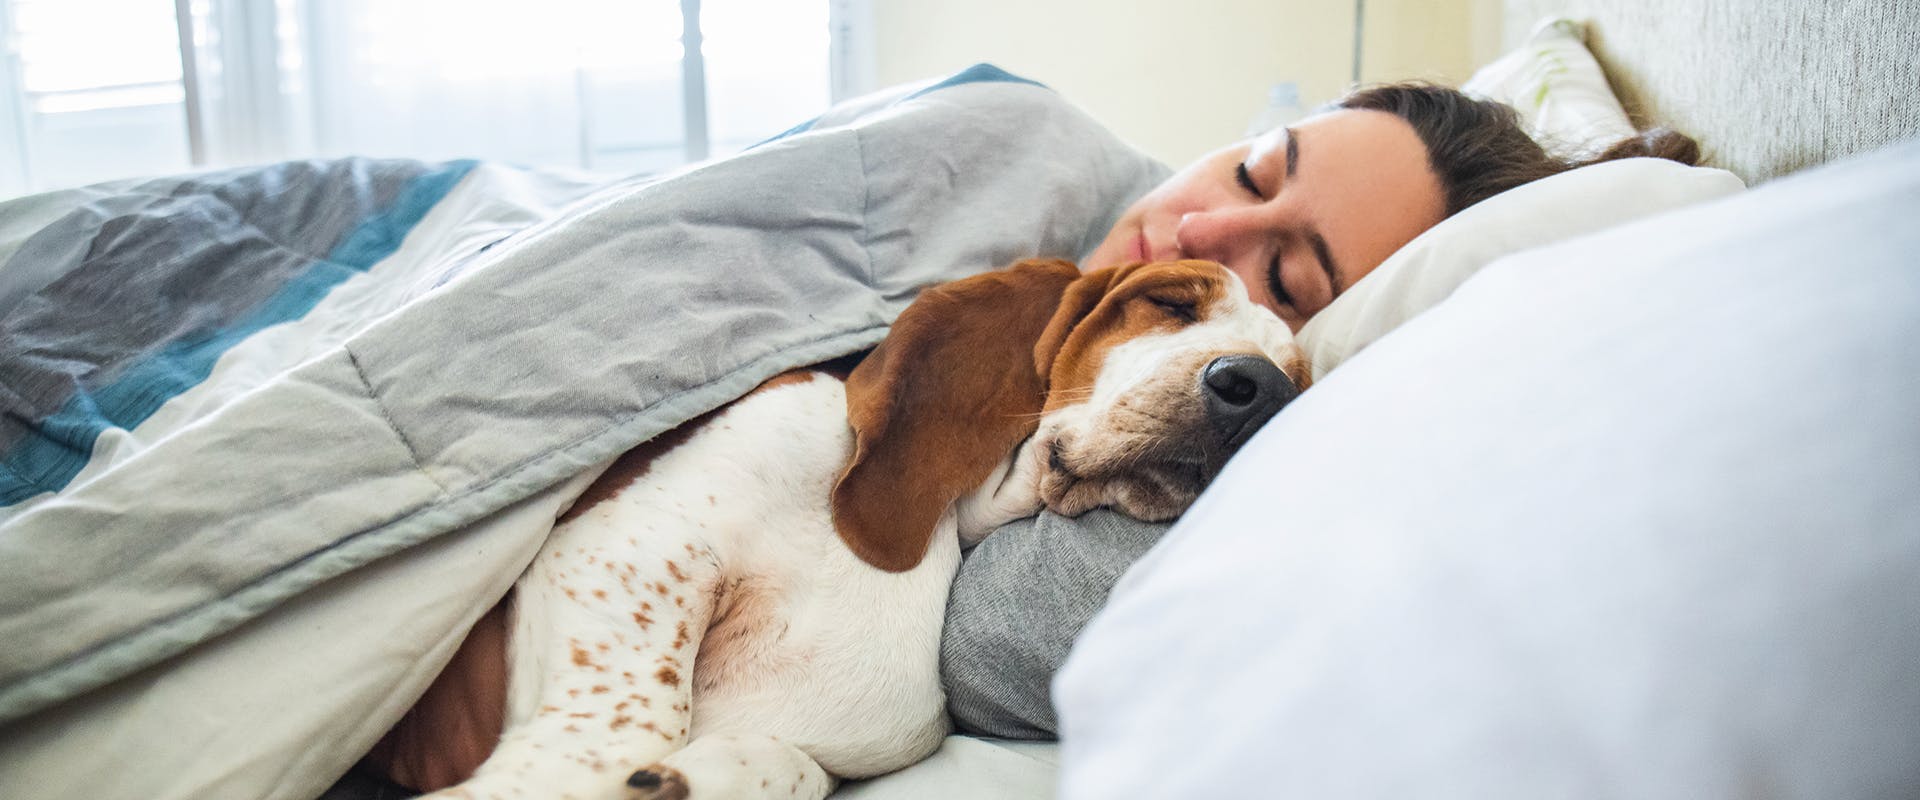 A woman and a Basset Hound puppy sleeping and sharing a bed 